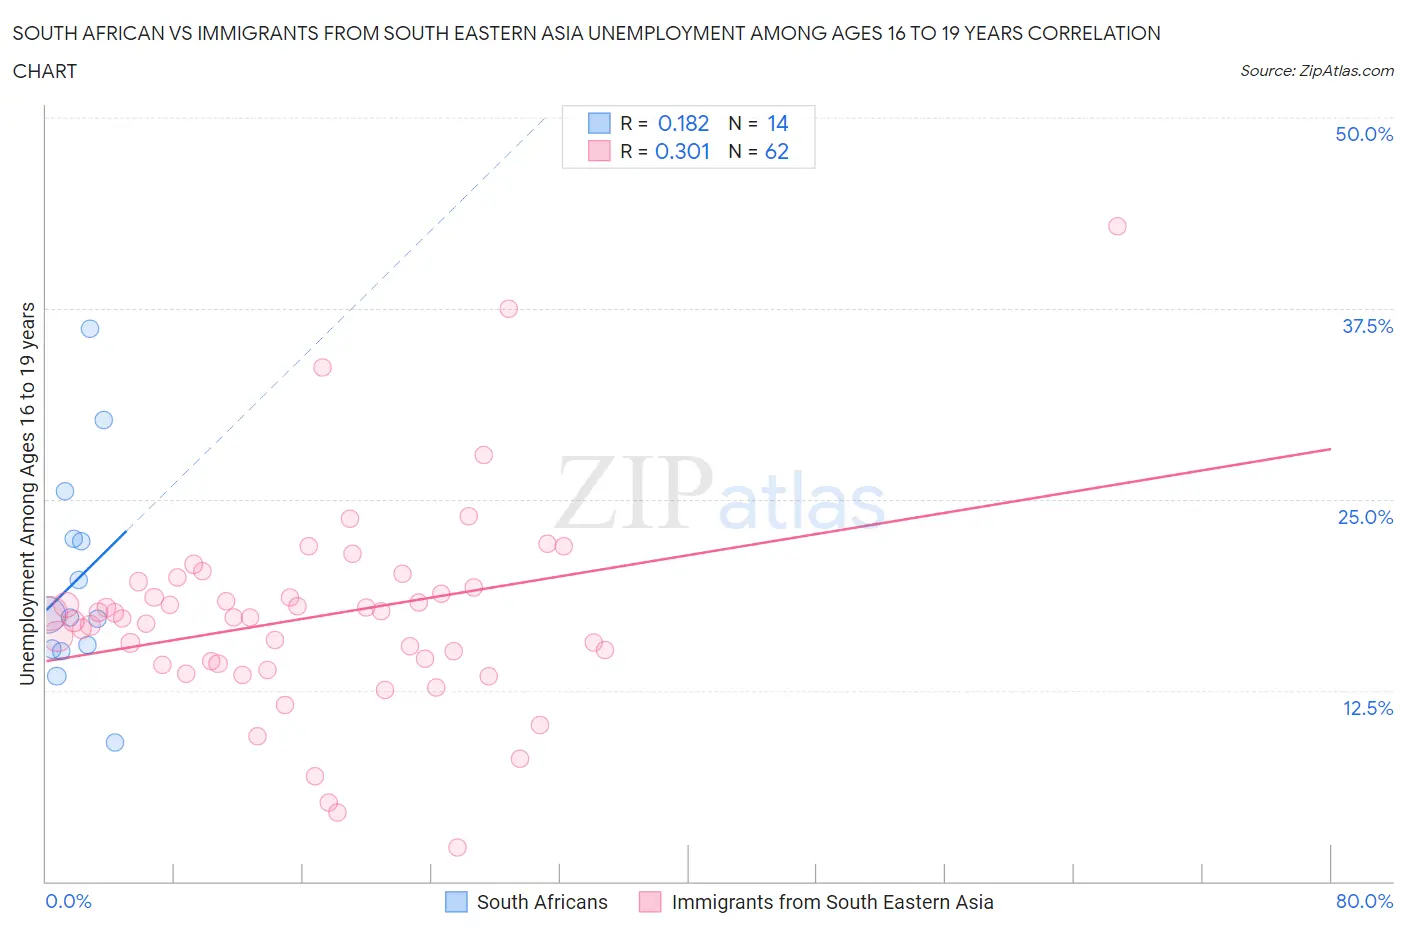 South African vs Immigrants from South Eastern Asia Unemployment Among Ages 16 to 19 years